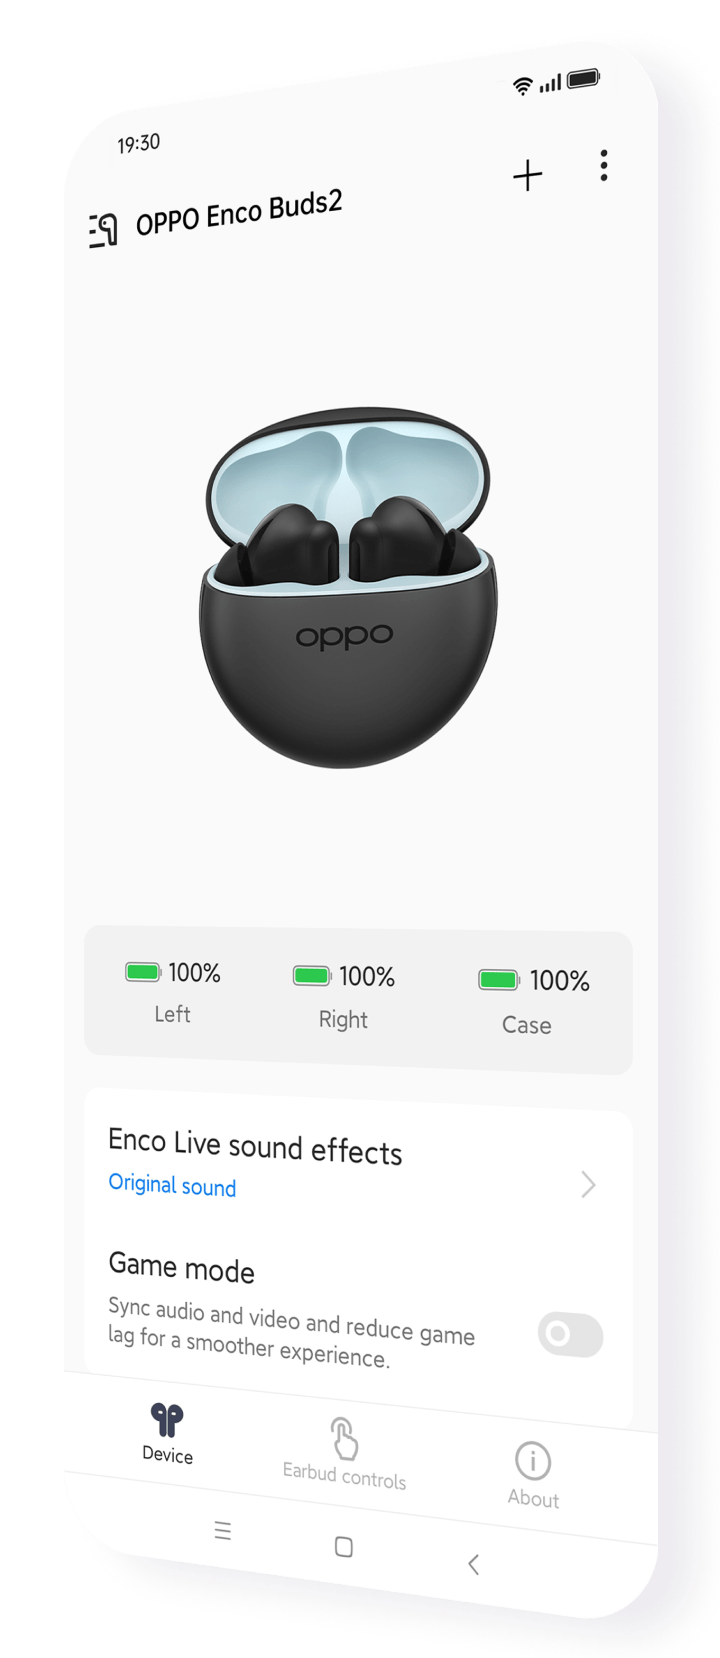 OPPO Enco Buds 2 Lime Green Wireless Earbuds at Rs 1799/box